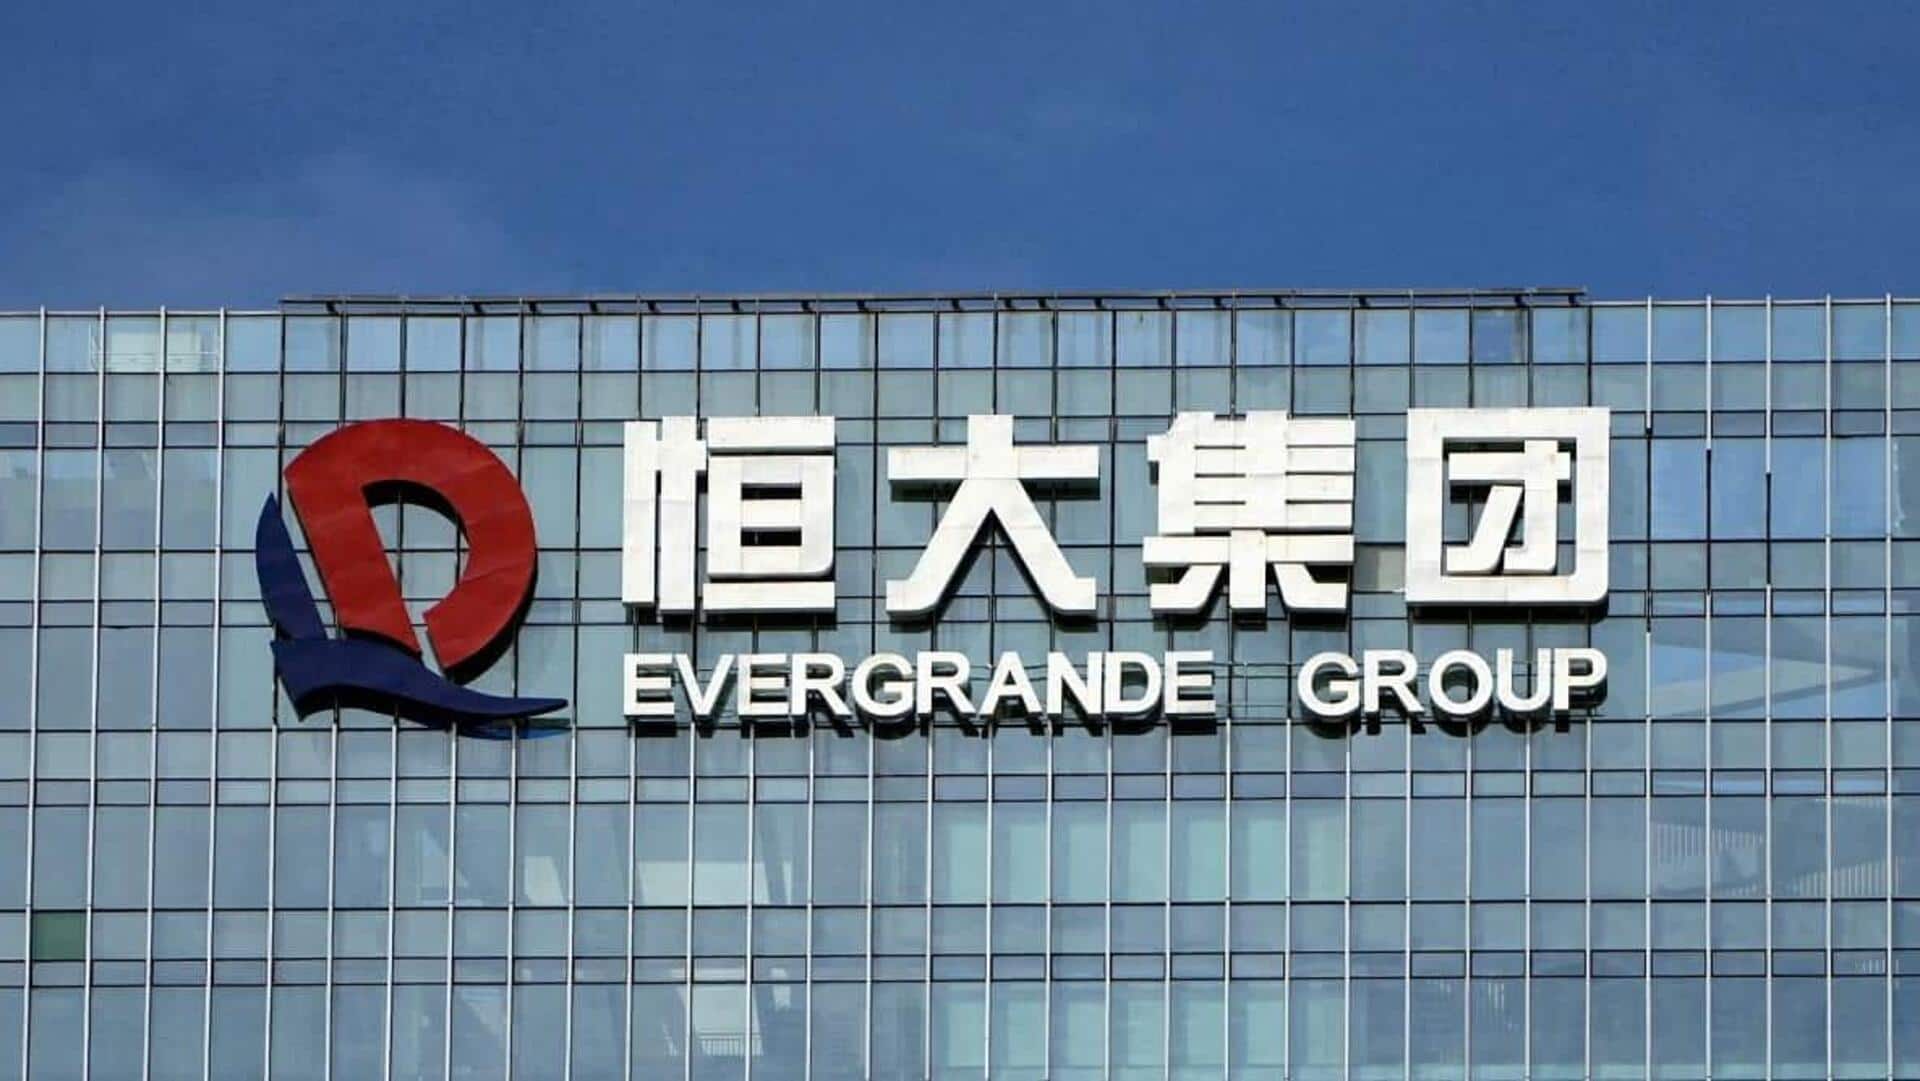 Distressed property developer China Evergrande to revise its restructuring plan